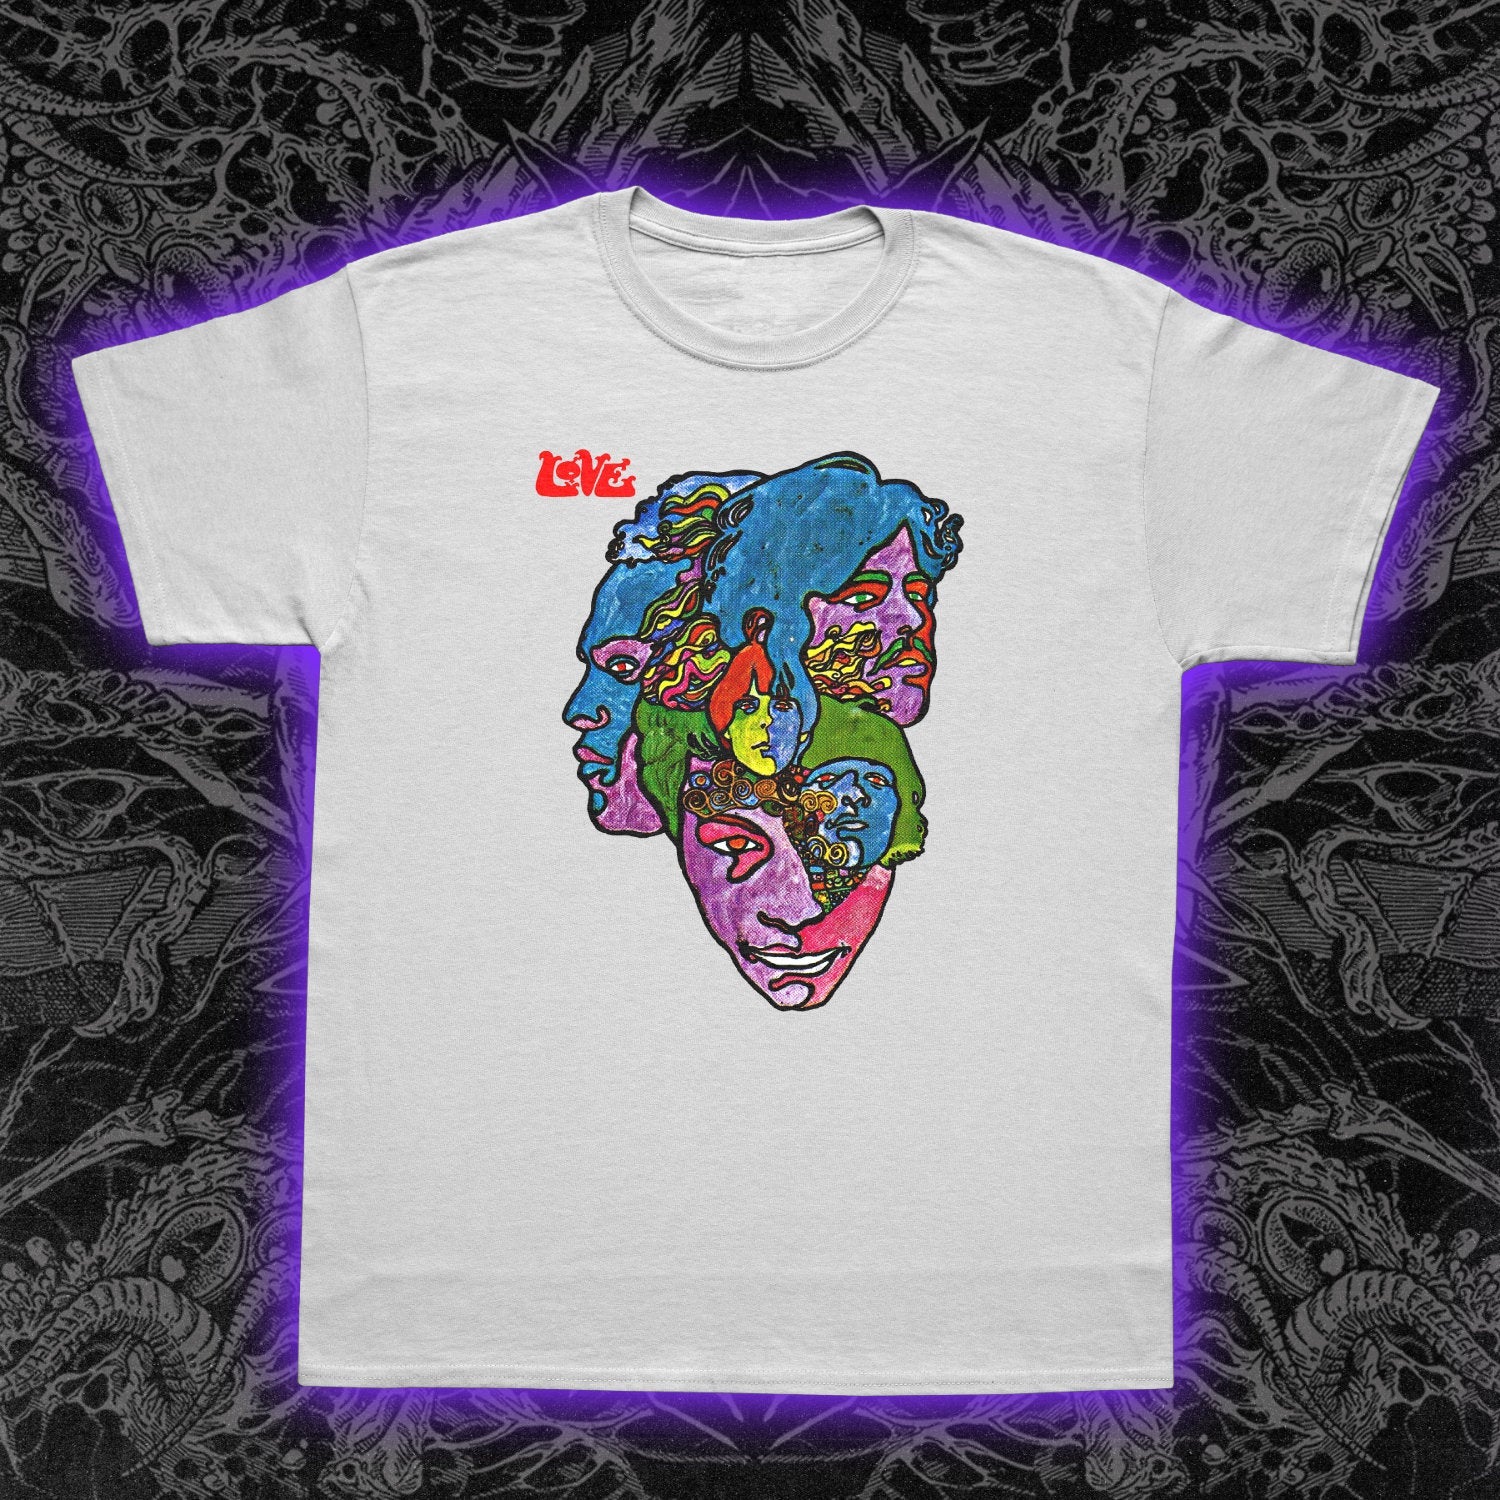 Love Forever Changes Premium Tee